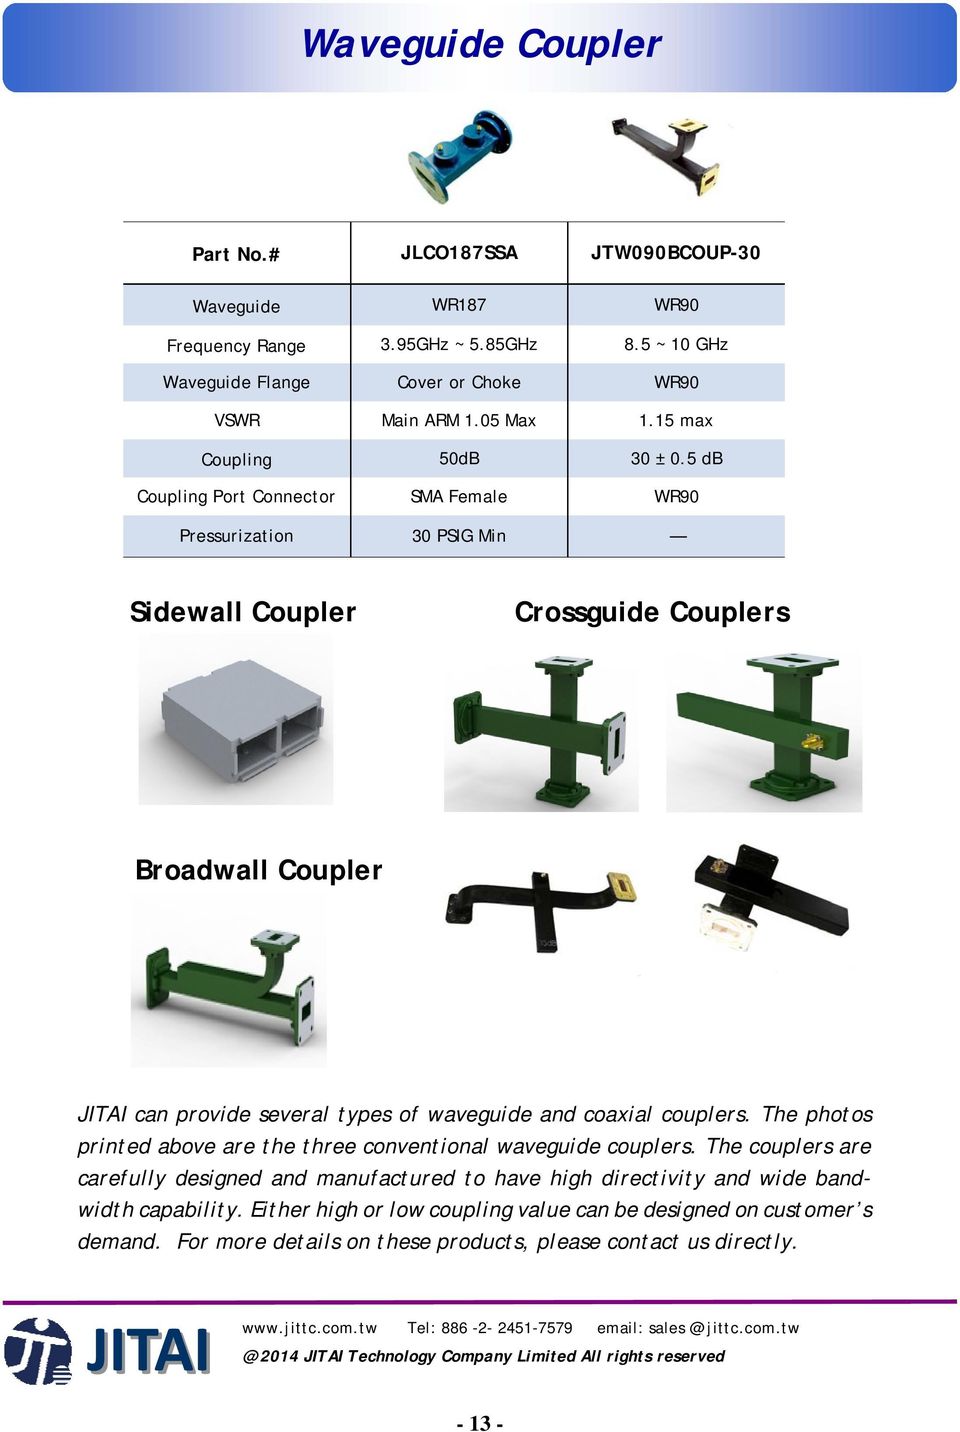 5 db Coupling Port Connector SMA Female WR90 Pressurization 30 PSIG Min Sidewall Coupler Crossguide Couplers Broadwall Coupler can provide several types of waveguide and coaxial